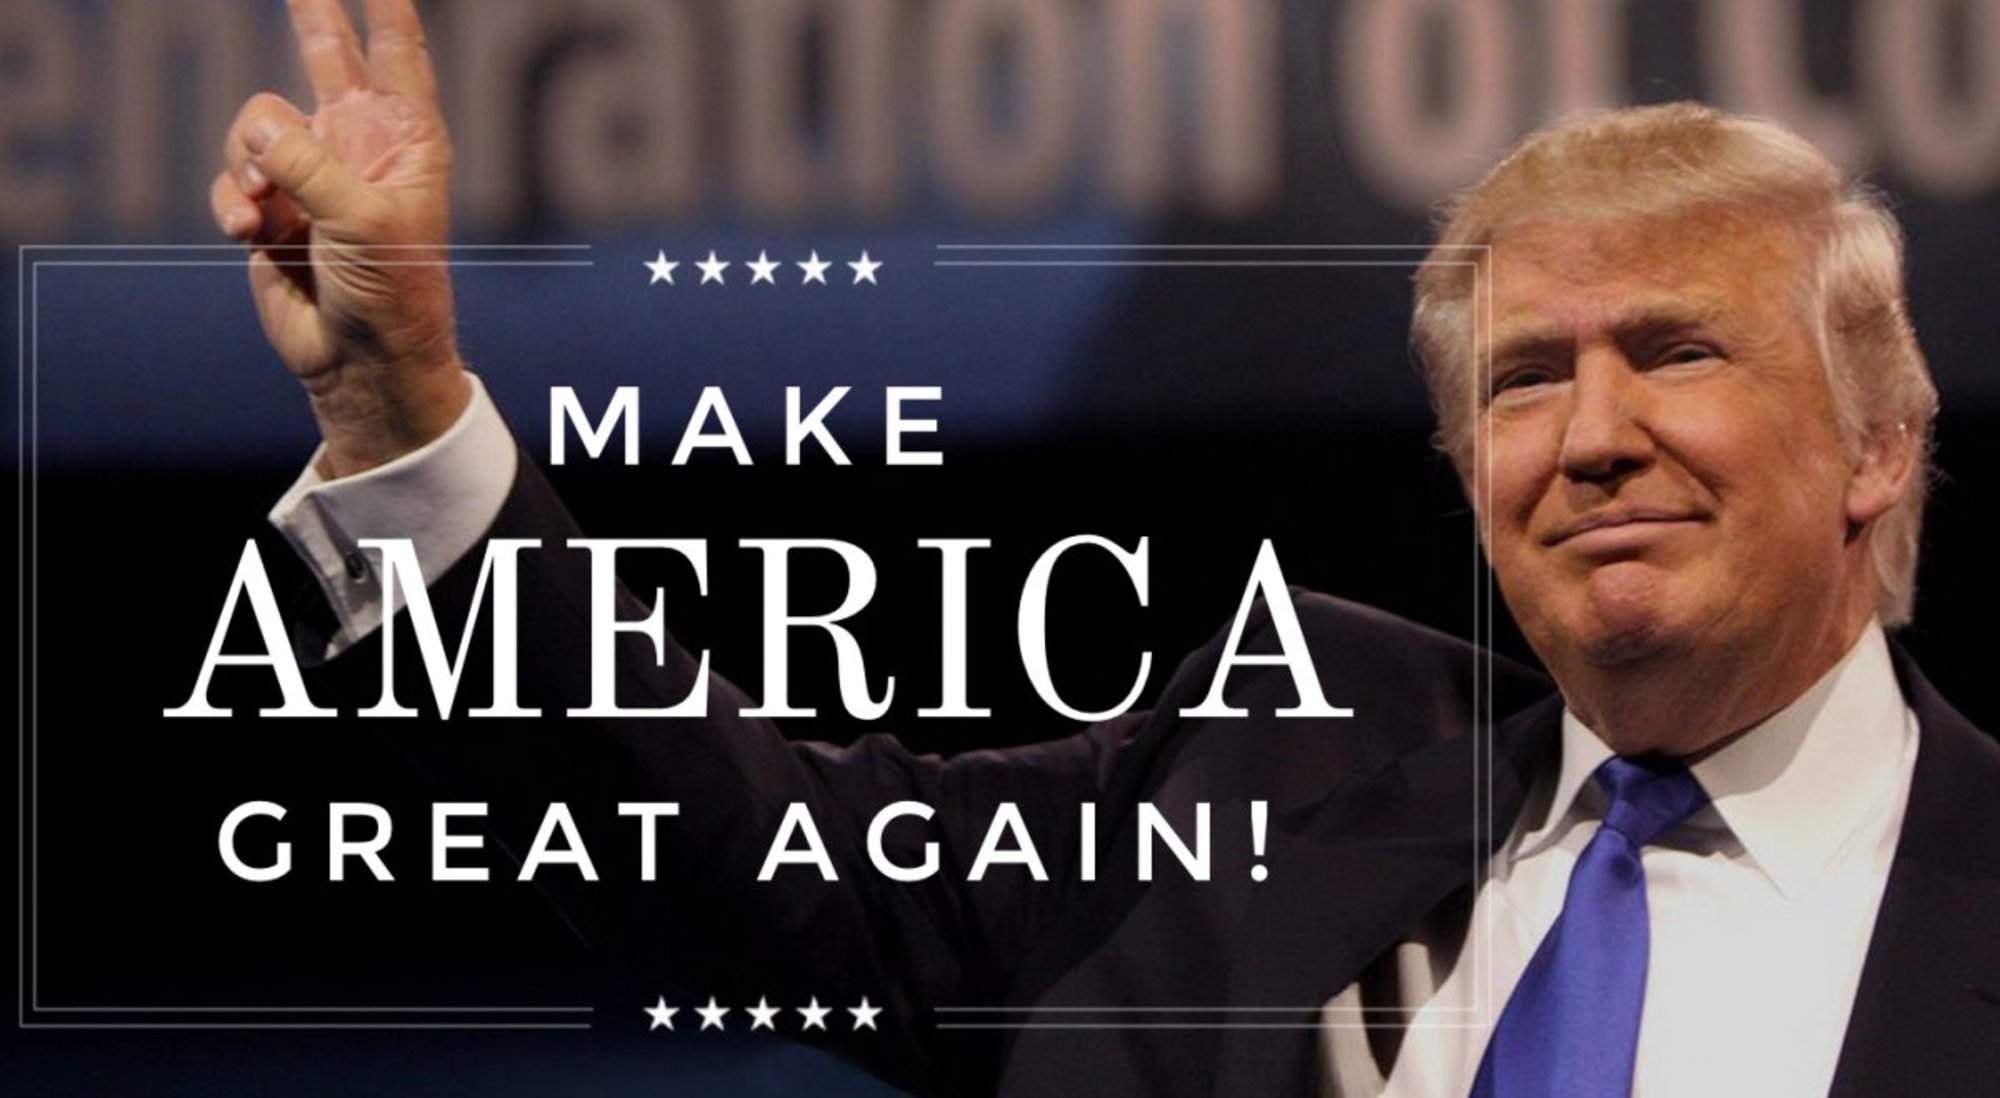 Let's make America Great Again - Trump -Image is Everything, Everything is Image